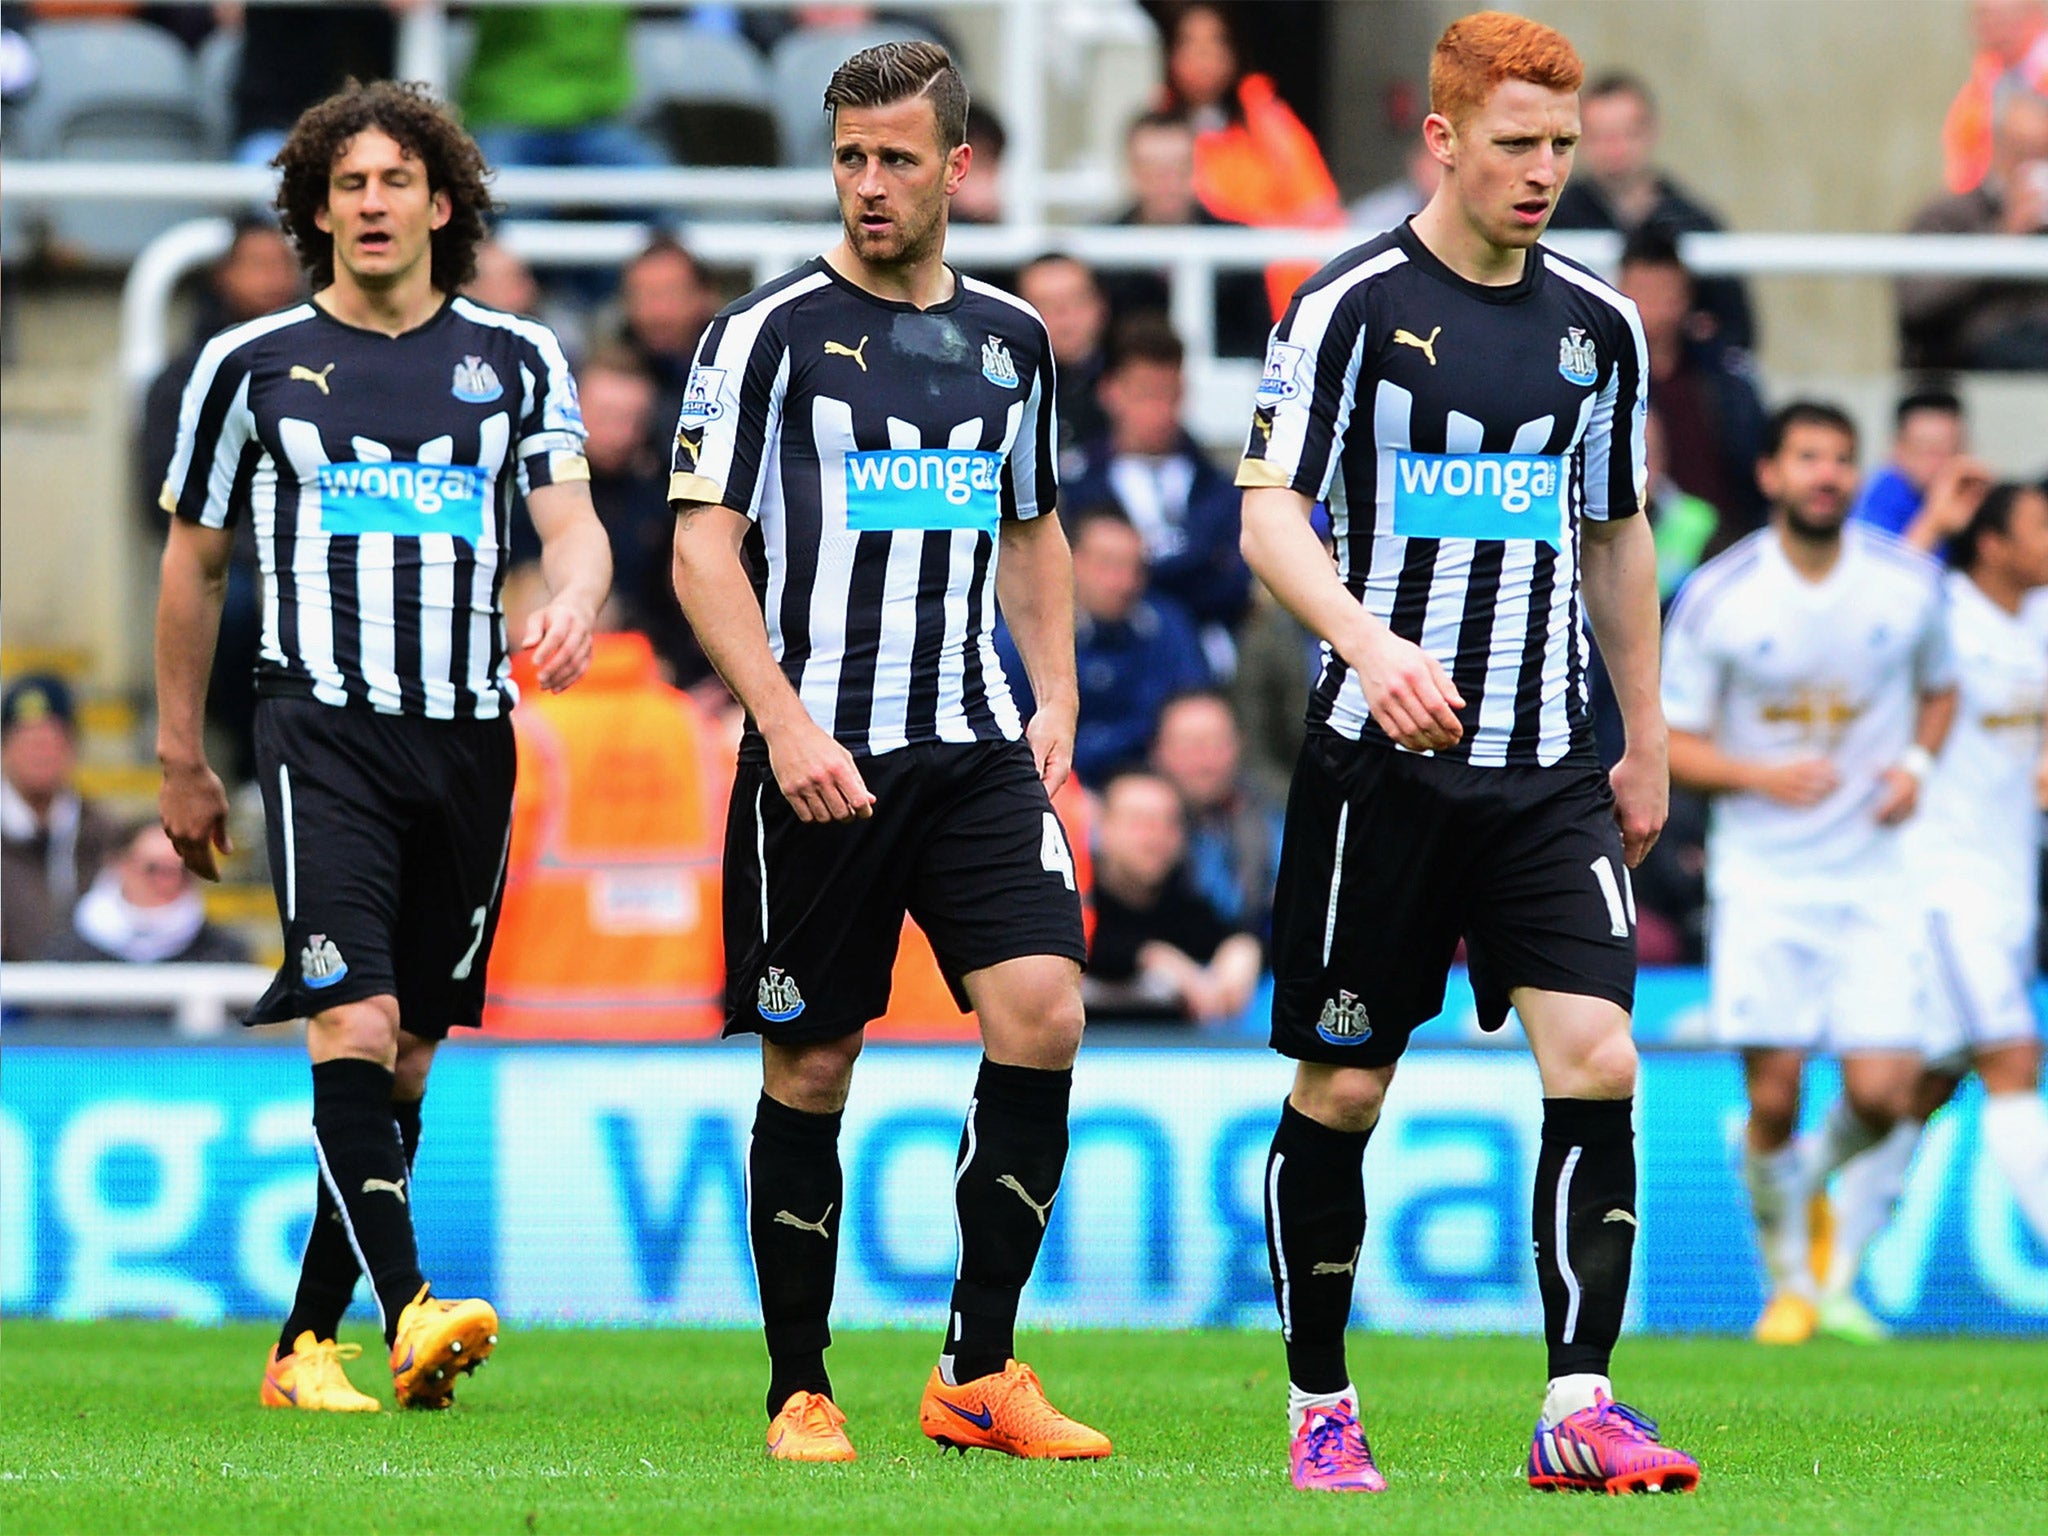 Newcastle players Fabricio Coloccini, Ryan Taylor and Jack Colback look glum during their defeat to Swansea in April